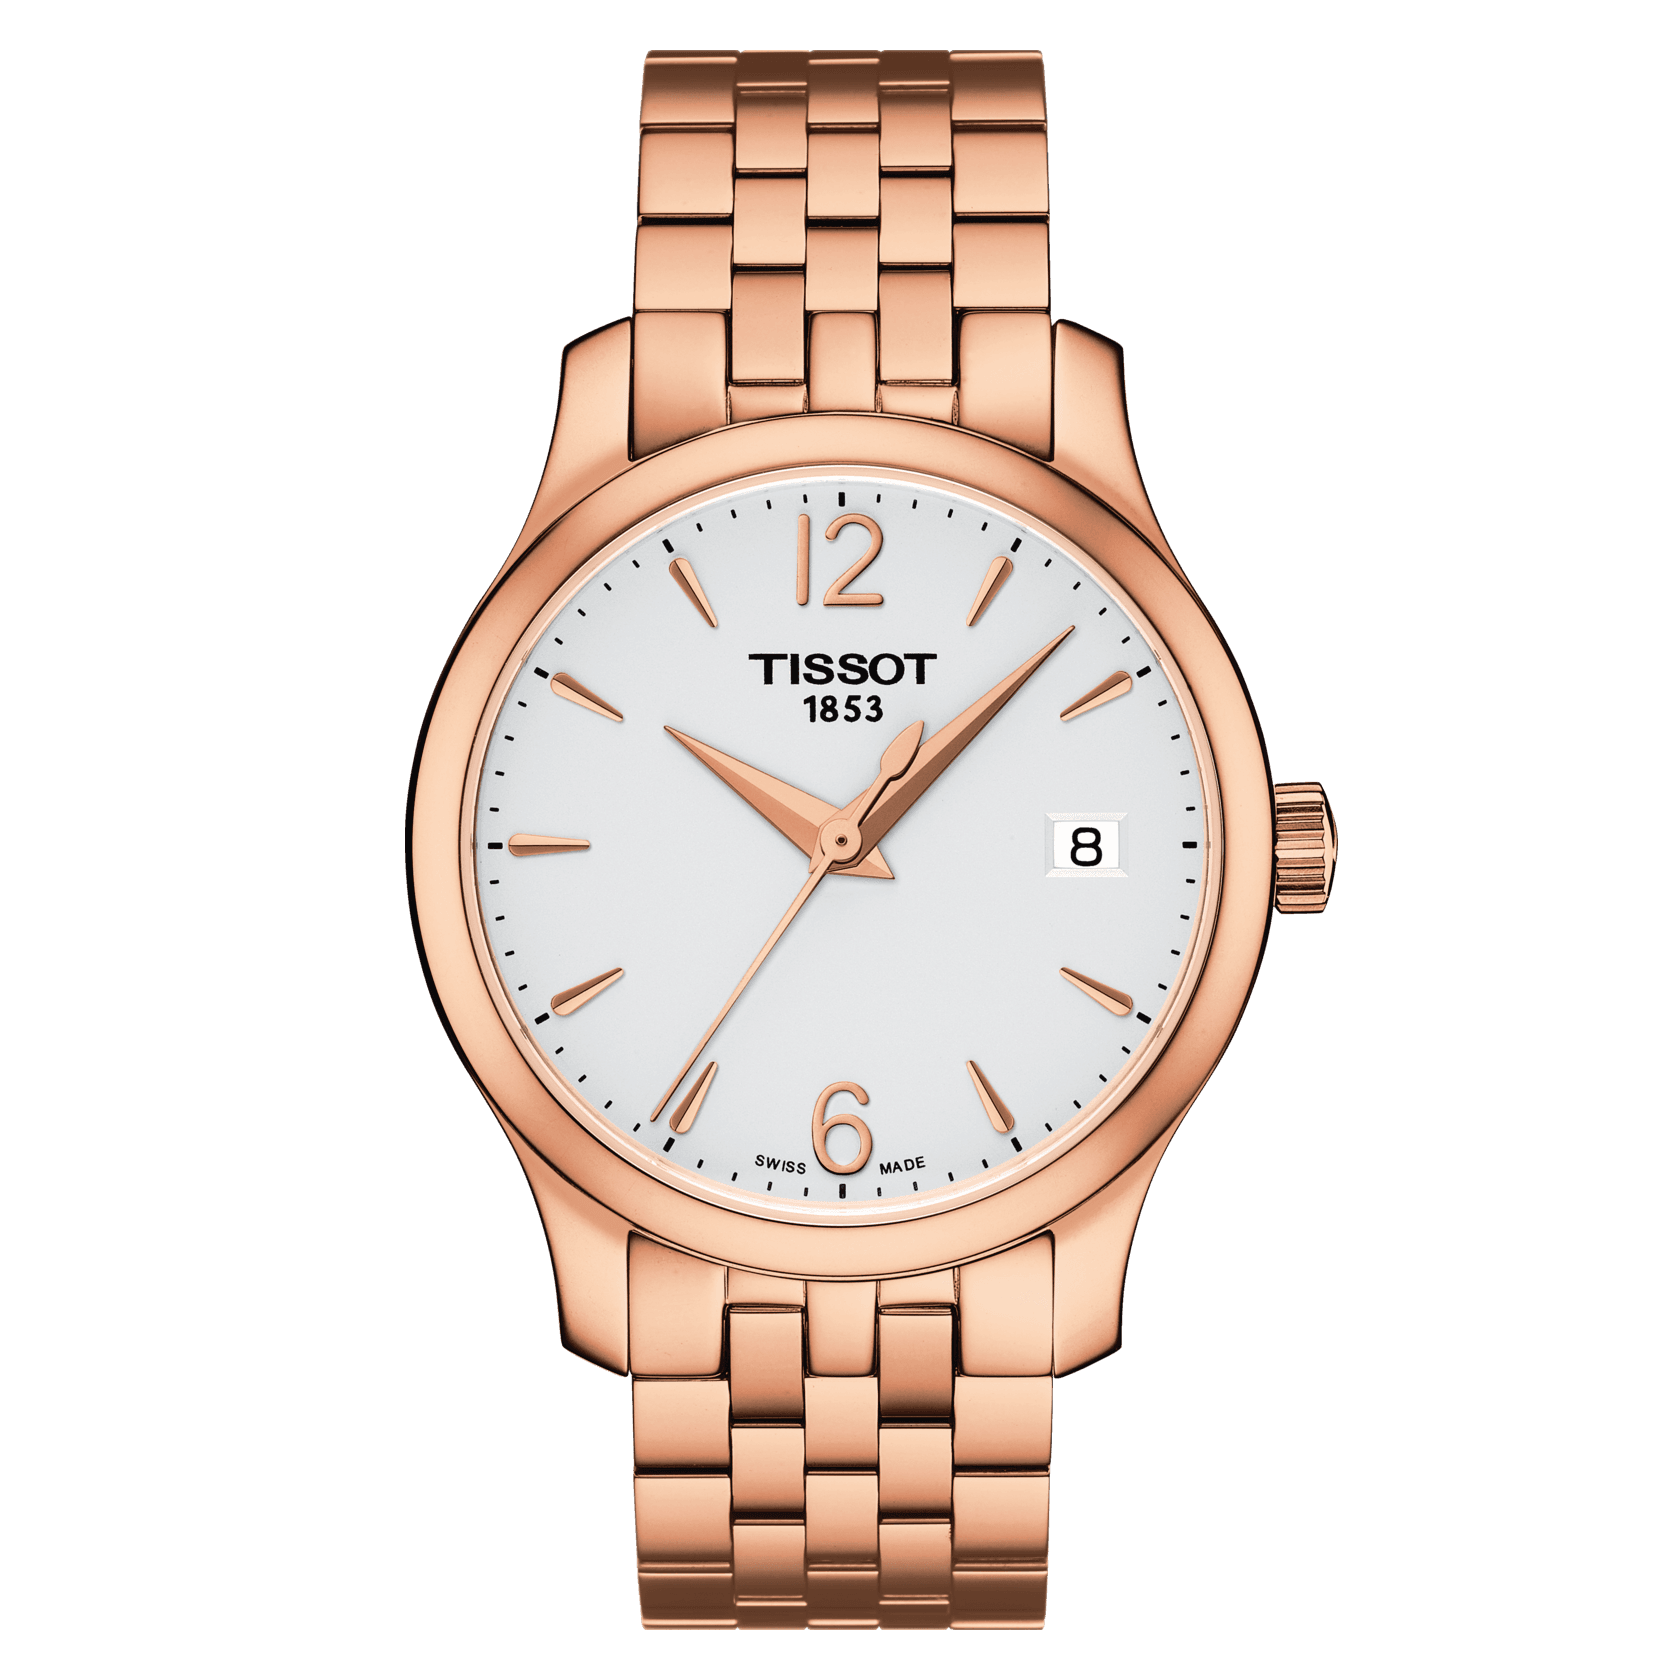 Tissot Tradition Quartz Stainless Steel White Dial Women's Watch - Kamal Watch Company